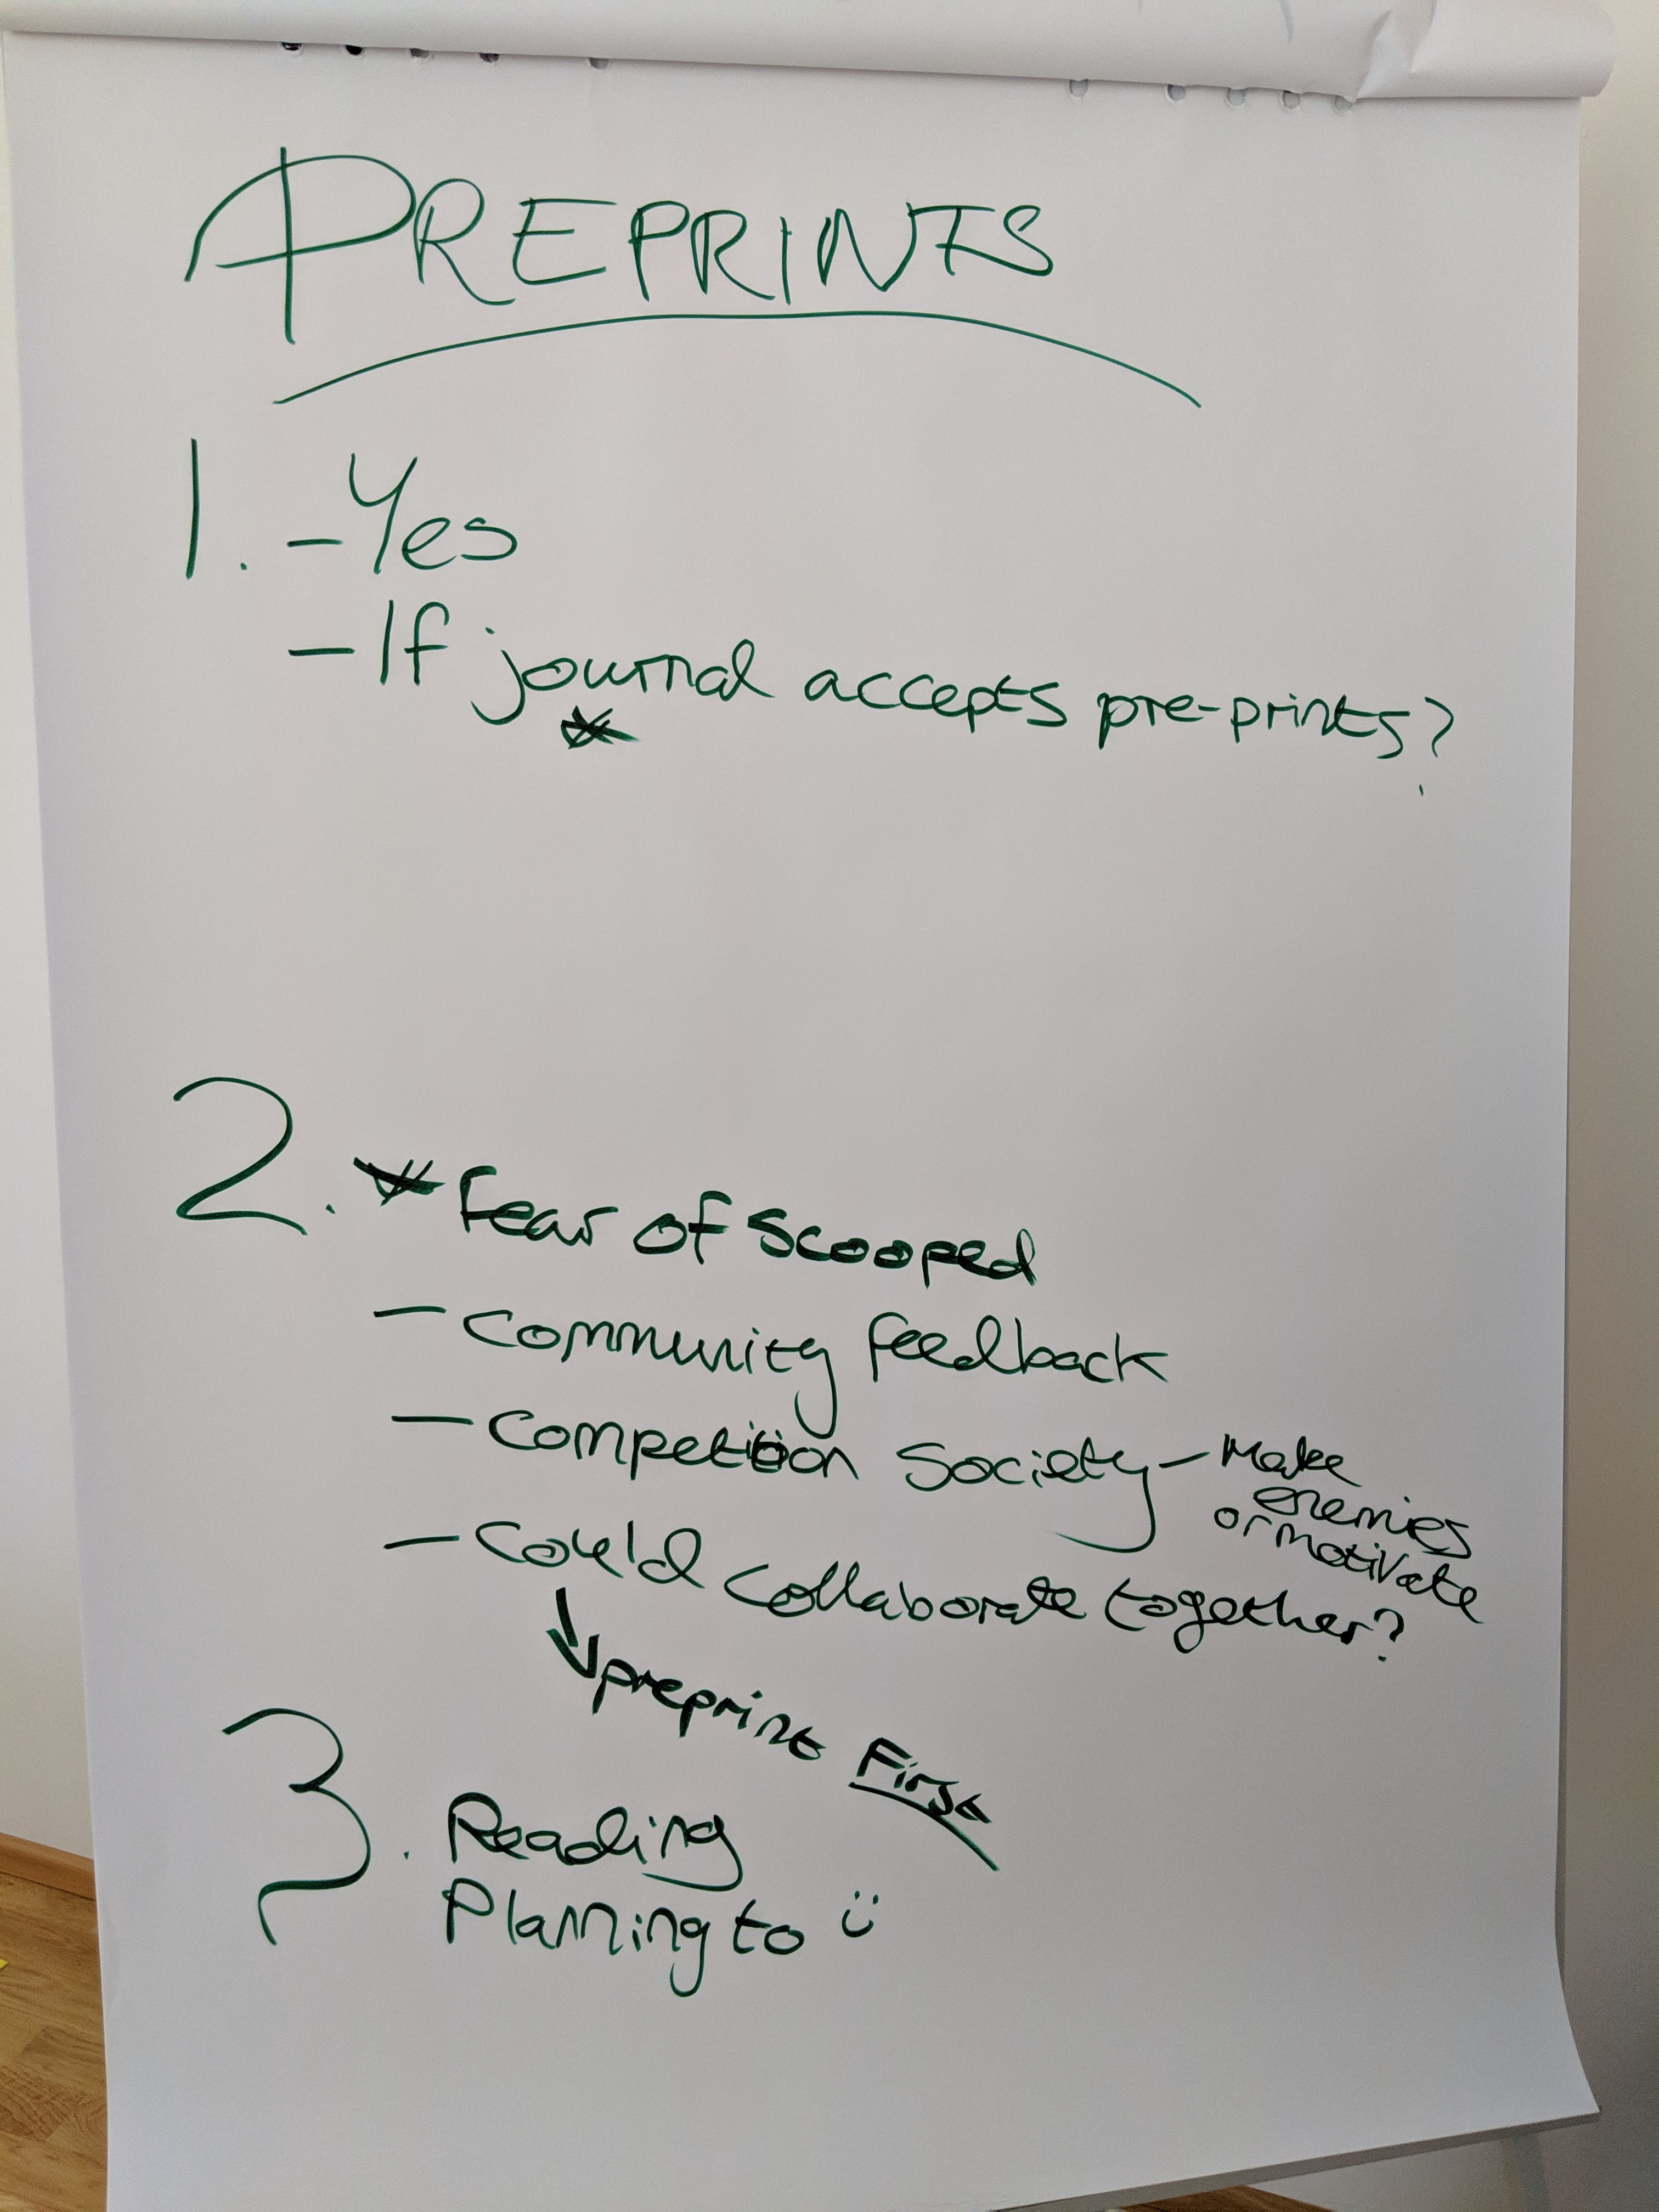 Flipchart with writing on it about preprints